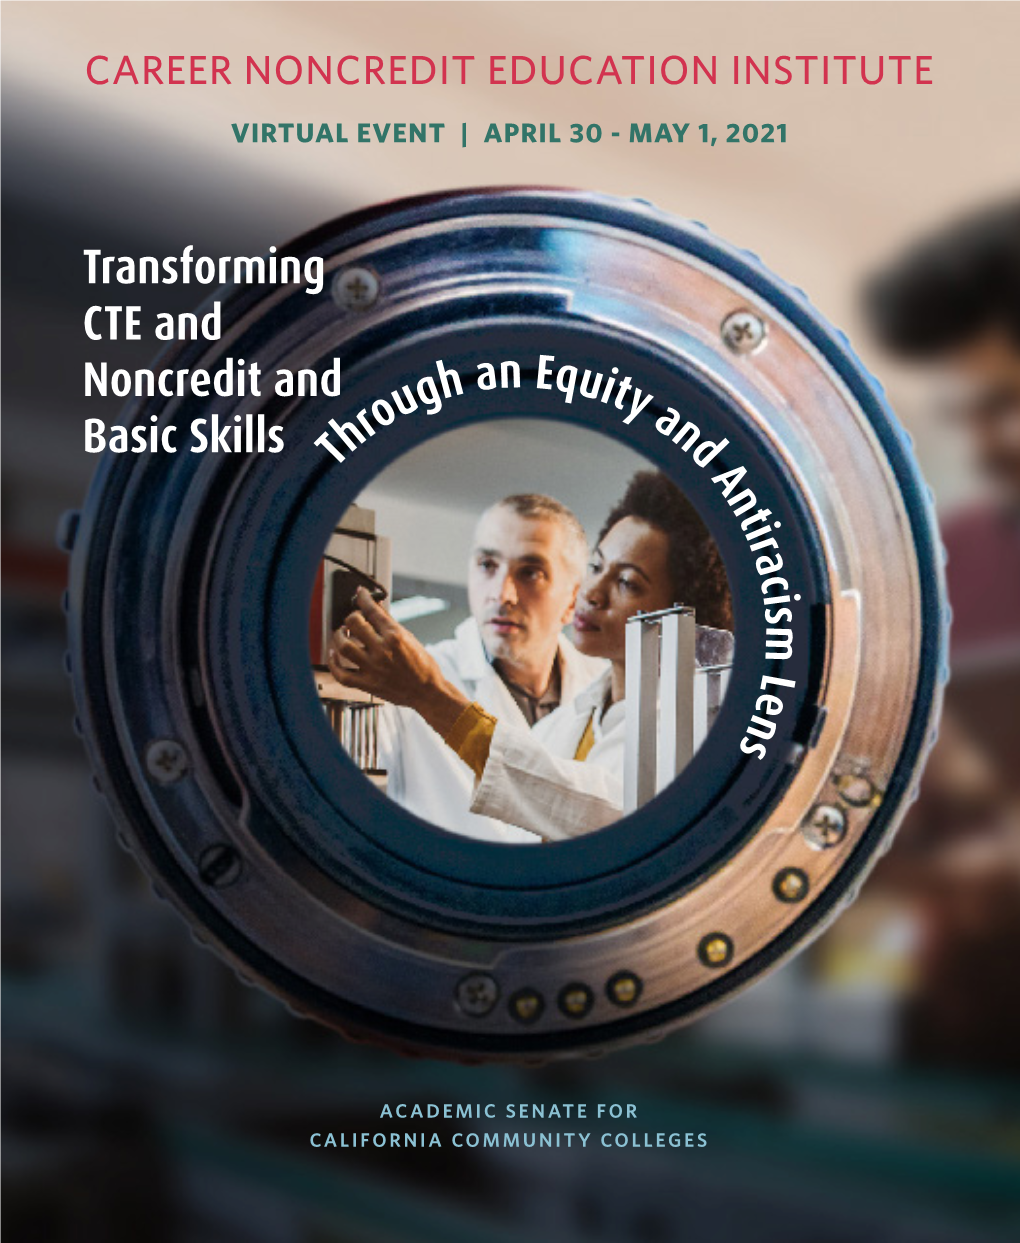 Transforming CTE and Noncredit and Basic Skills Through an Equity and Antiracism Lens